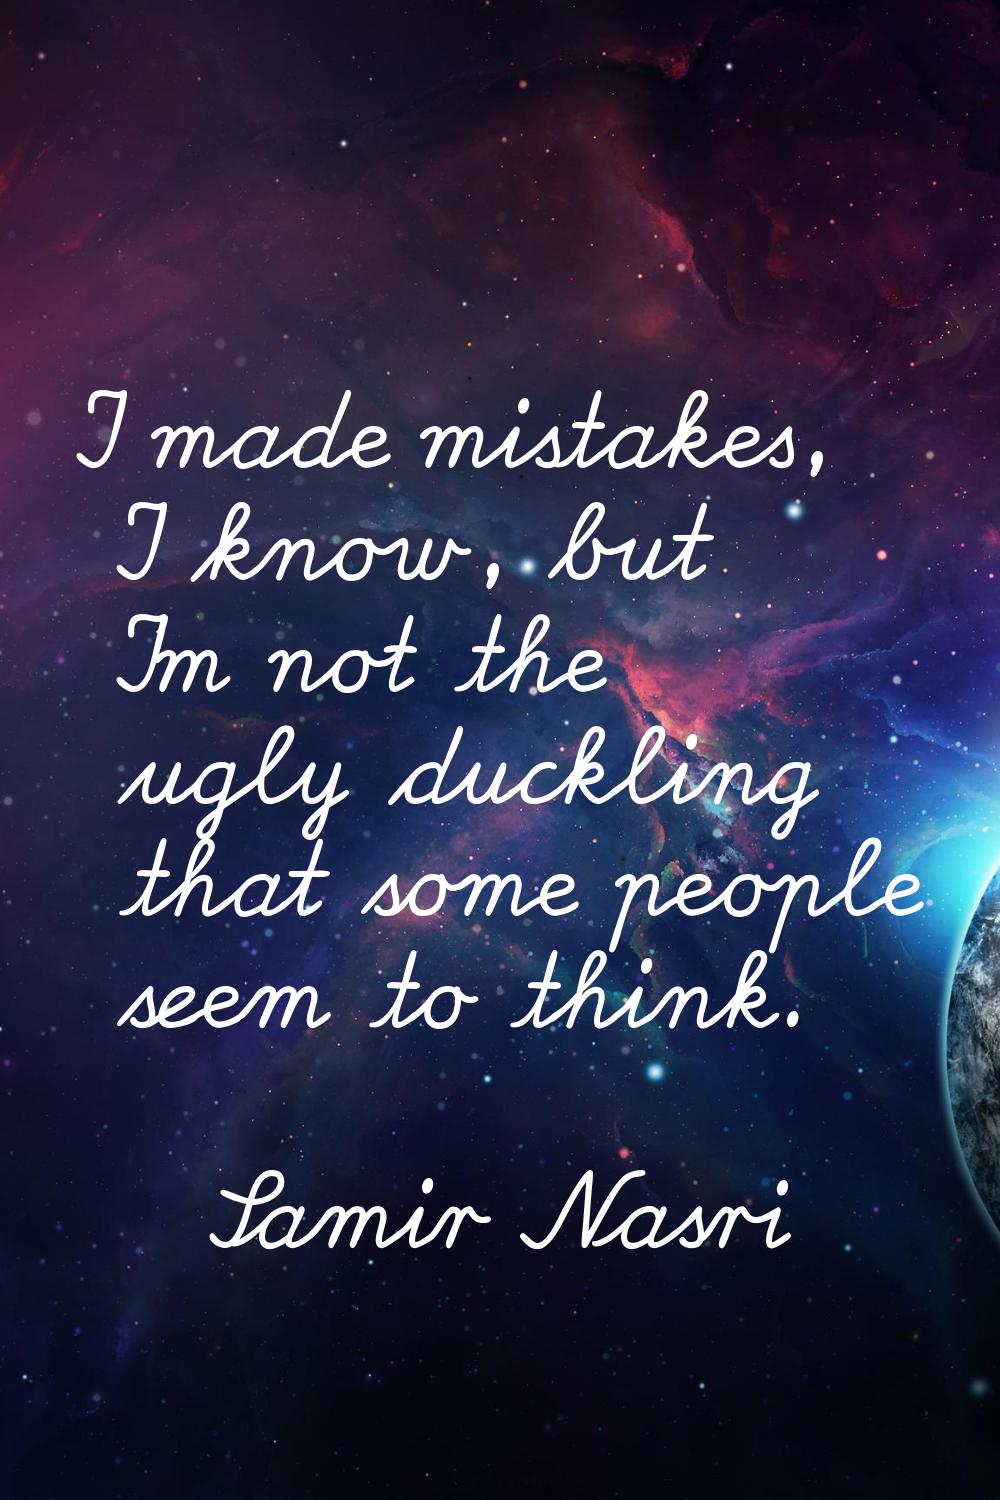 I made mistakes, I know, but I'm not the ugly duckling that some people seem to think.